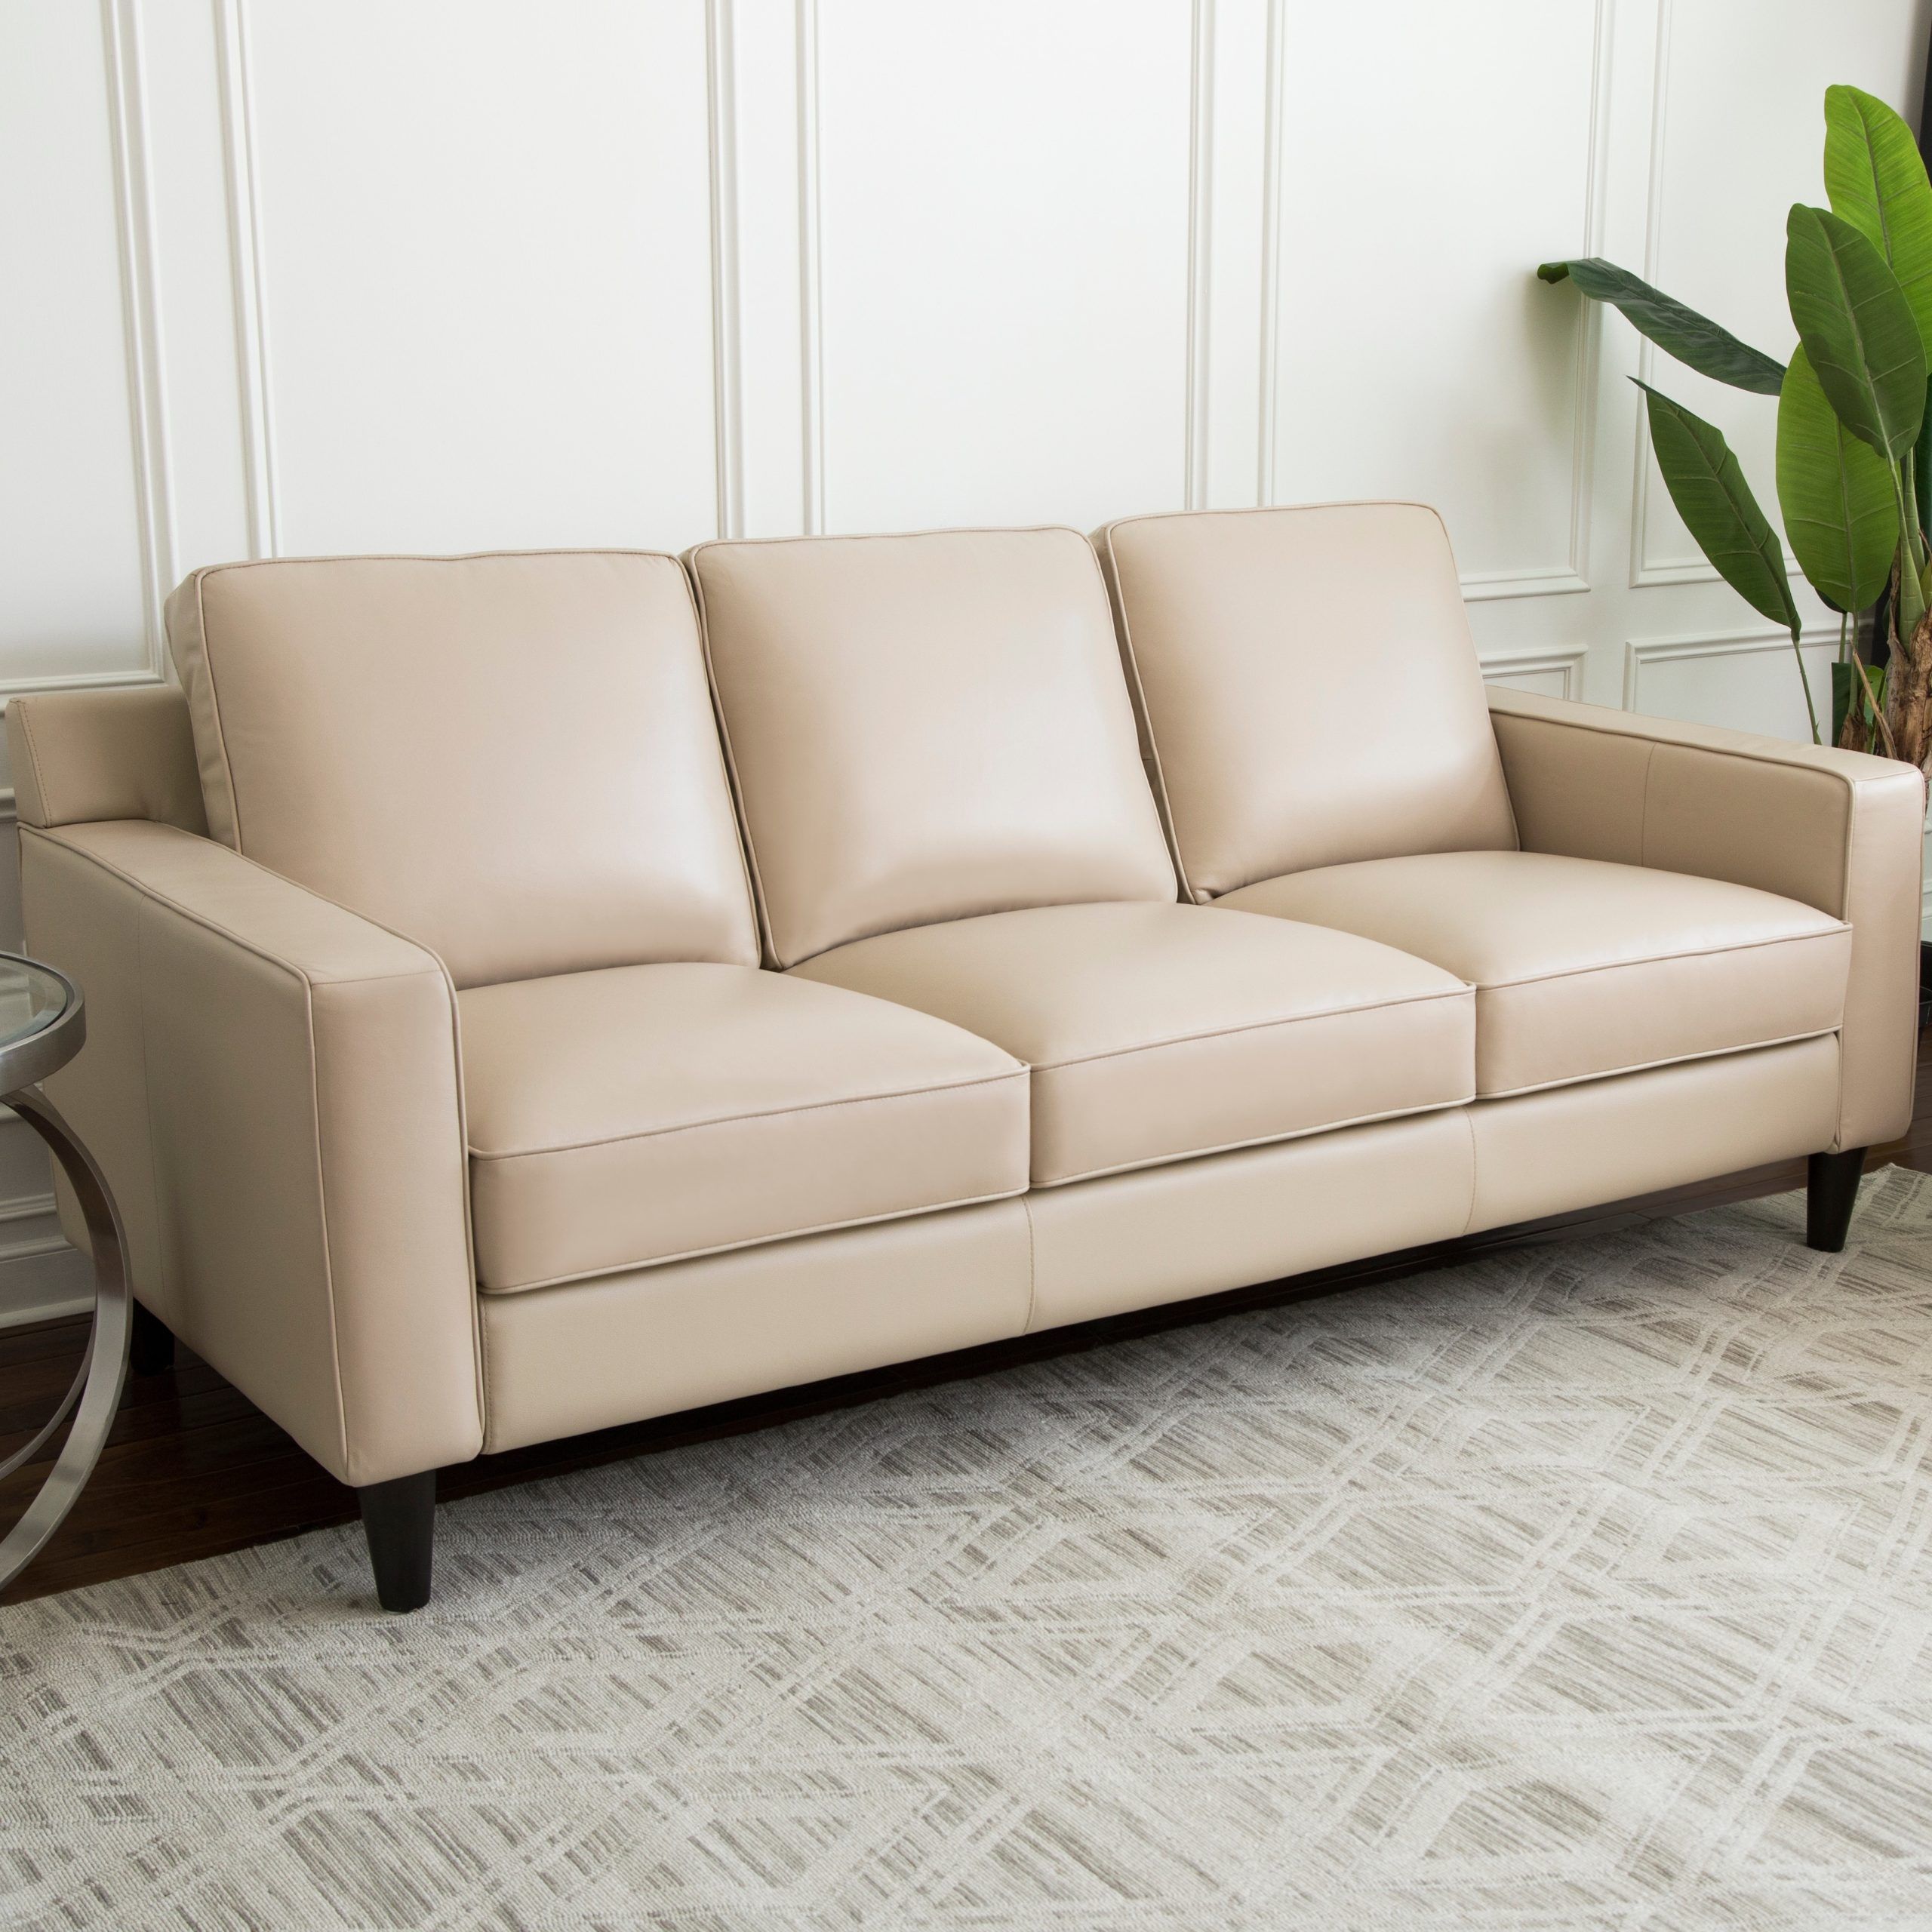 Kathleen Cream Leather 91 Sofa Living Spaces Within Sofas In Cream (View 15 of 20)